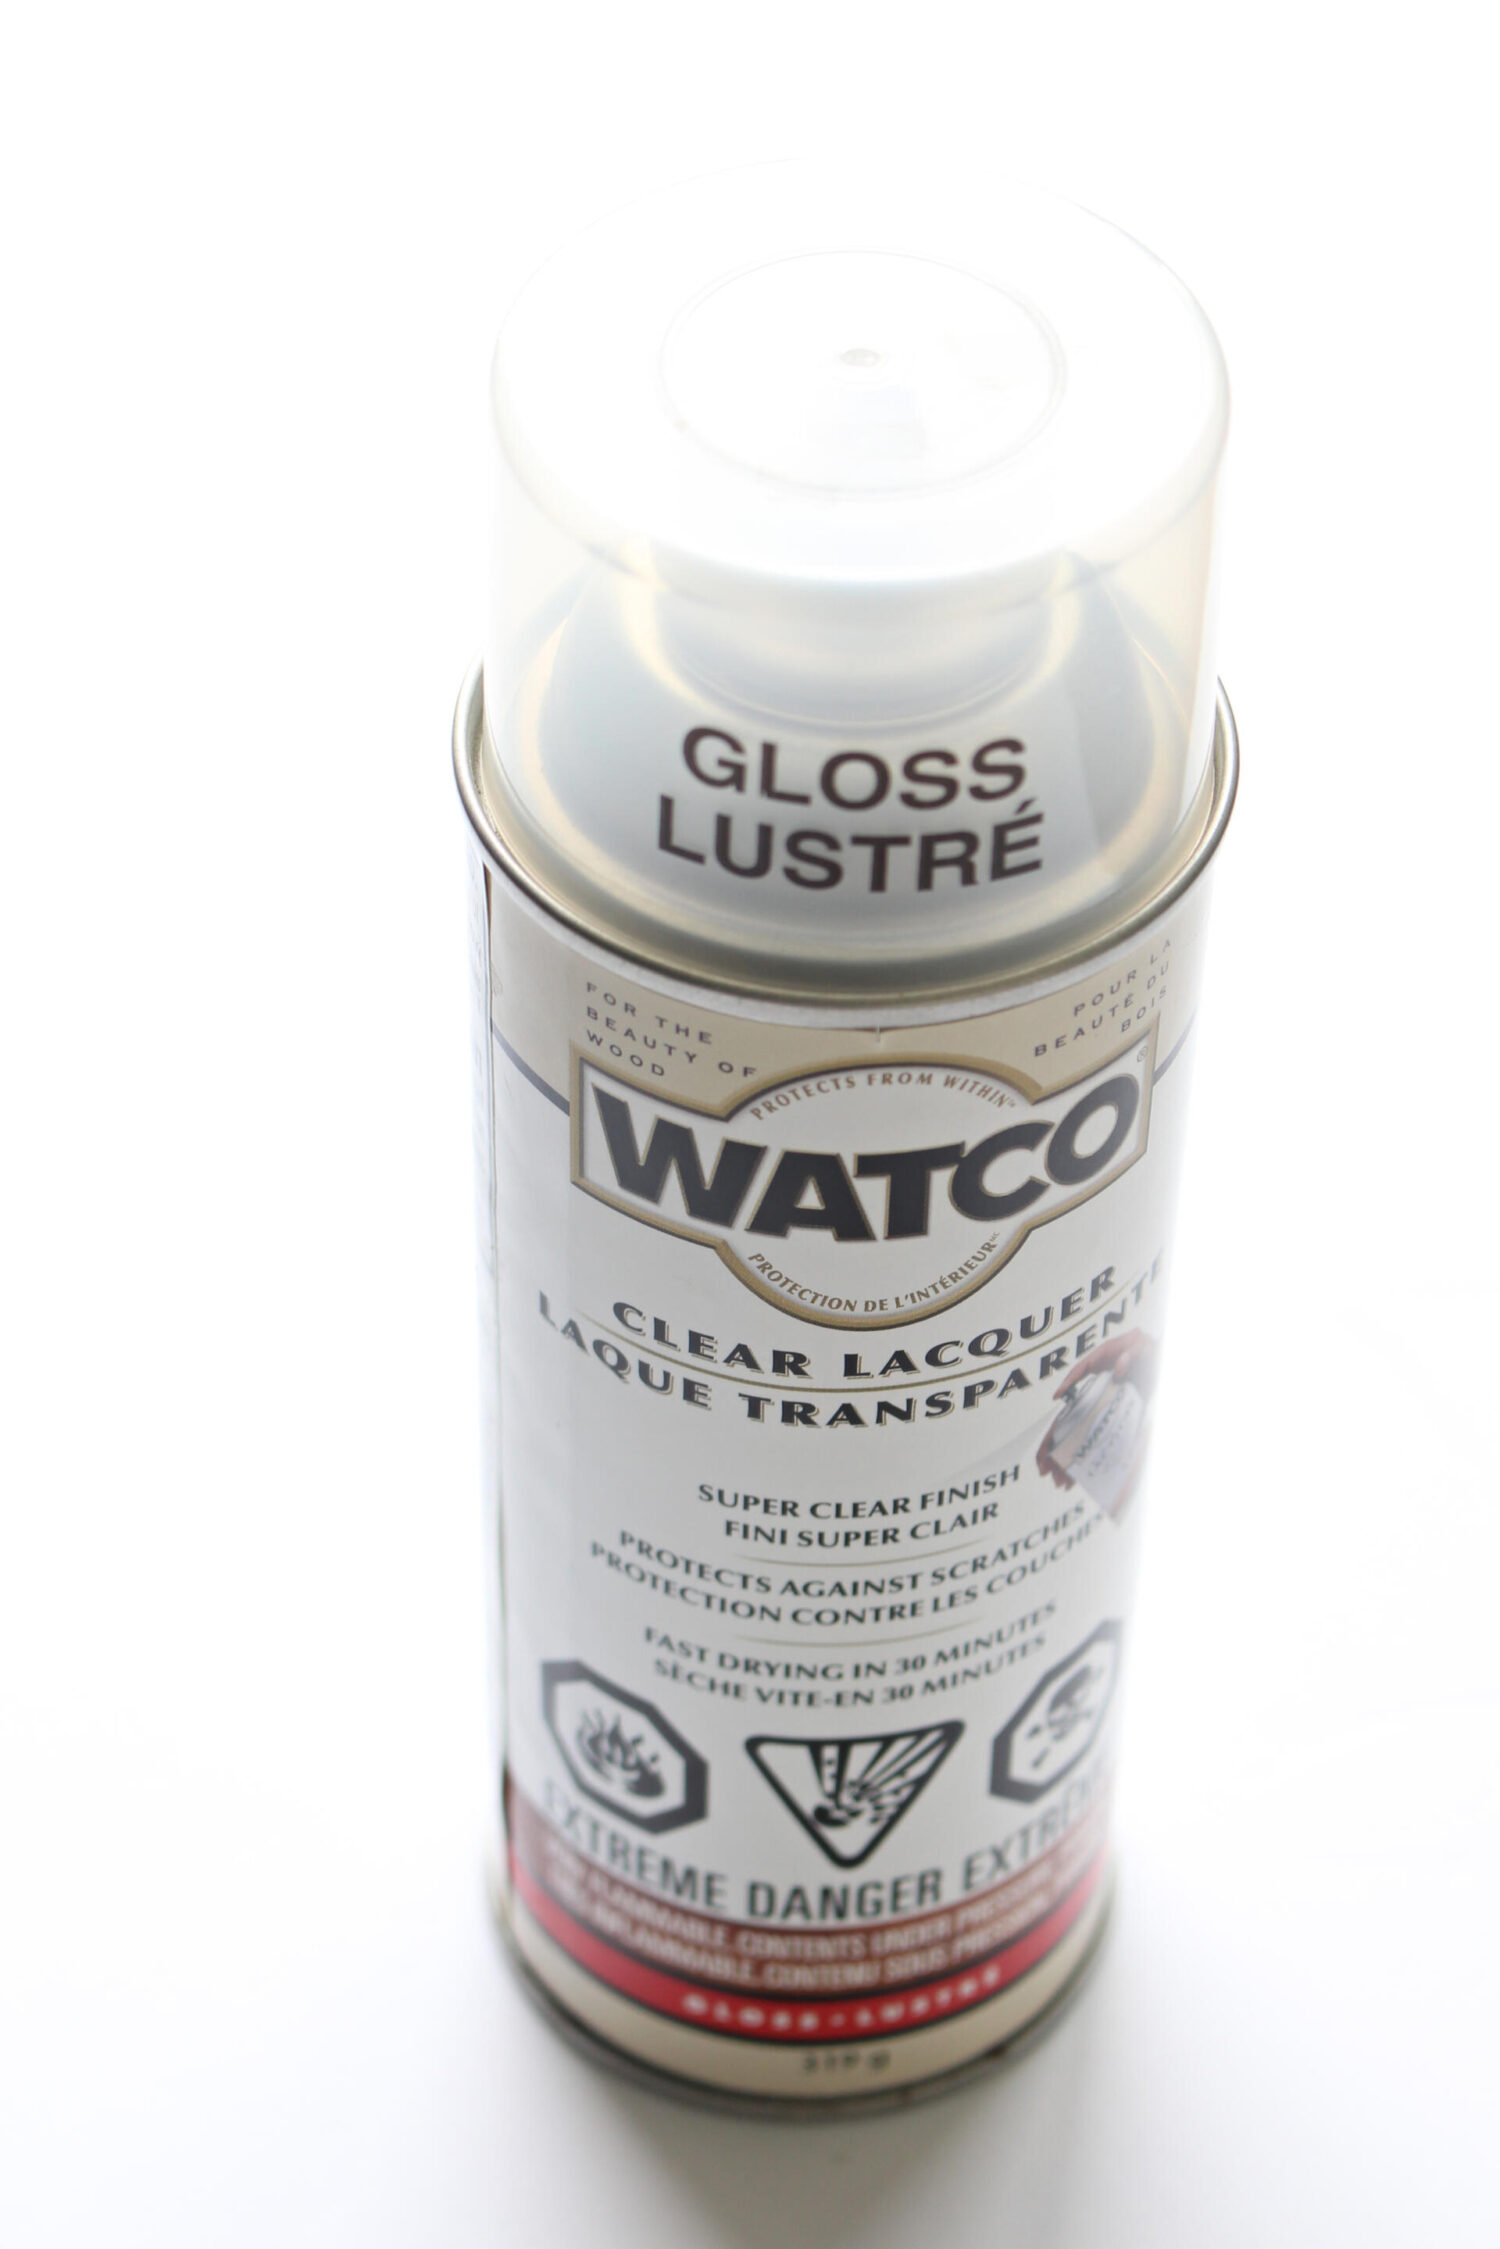 Watco clear lacquer